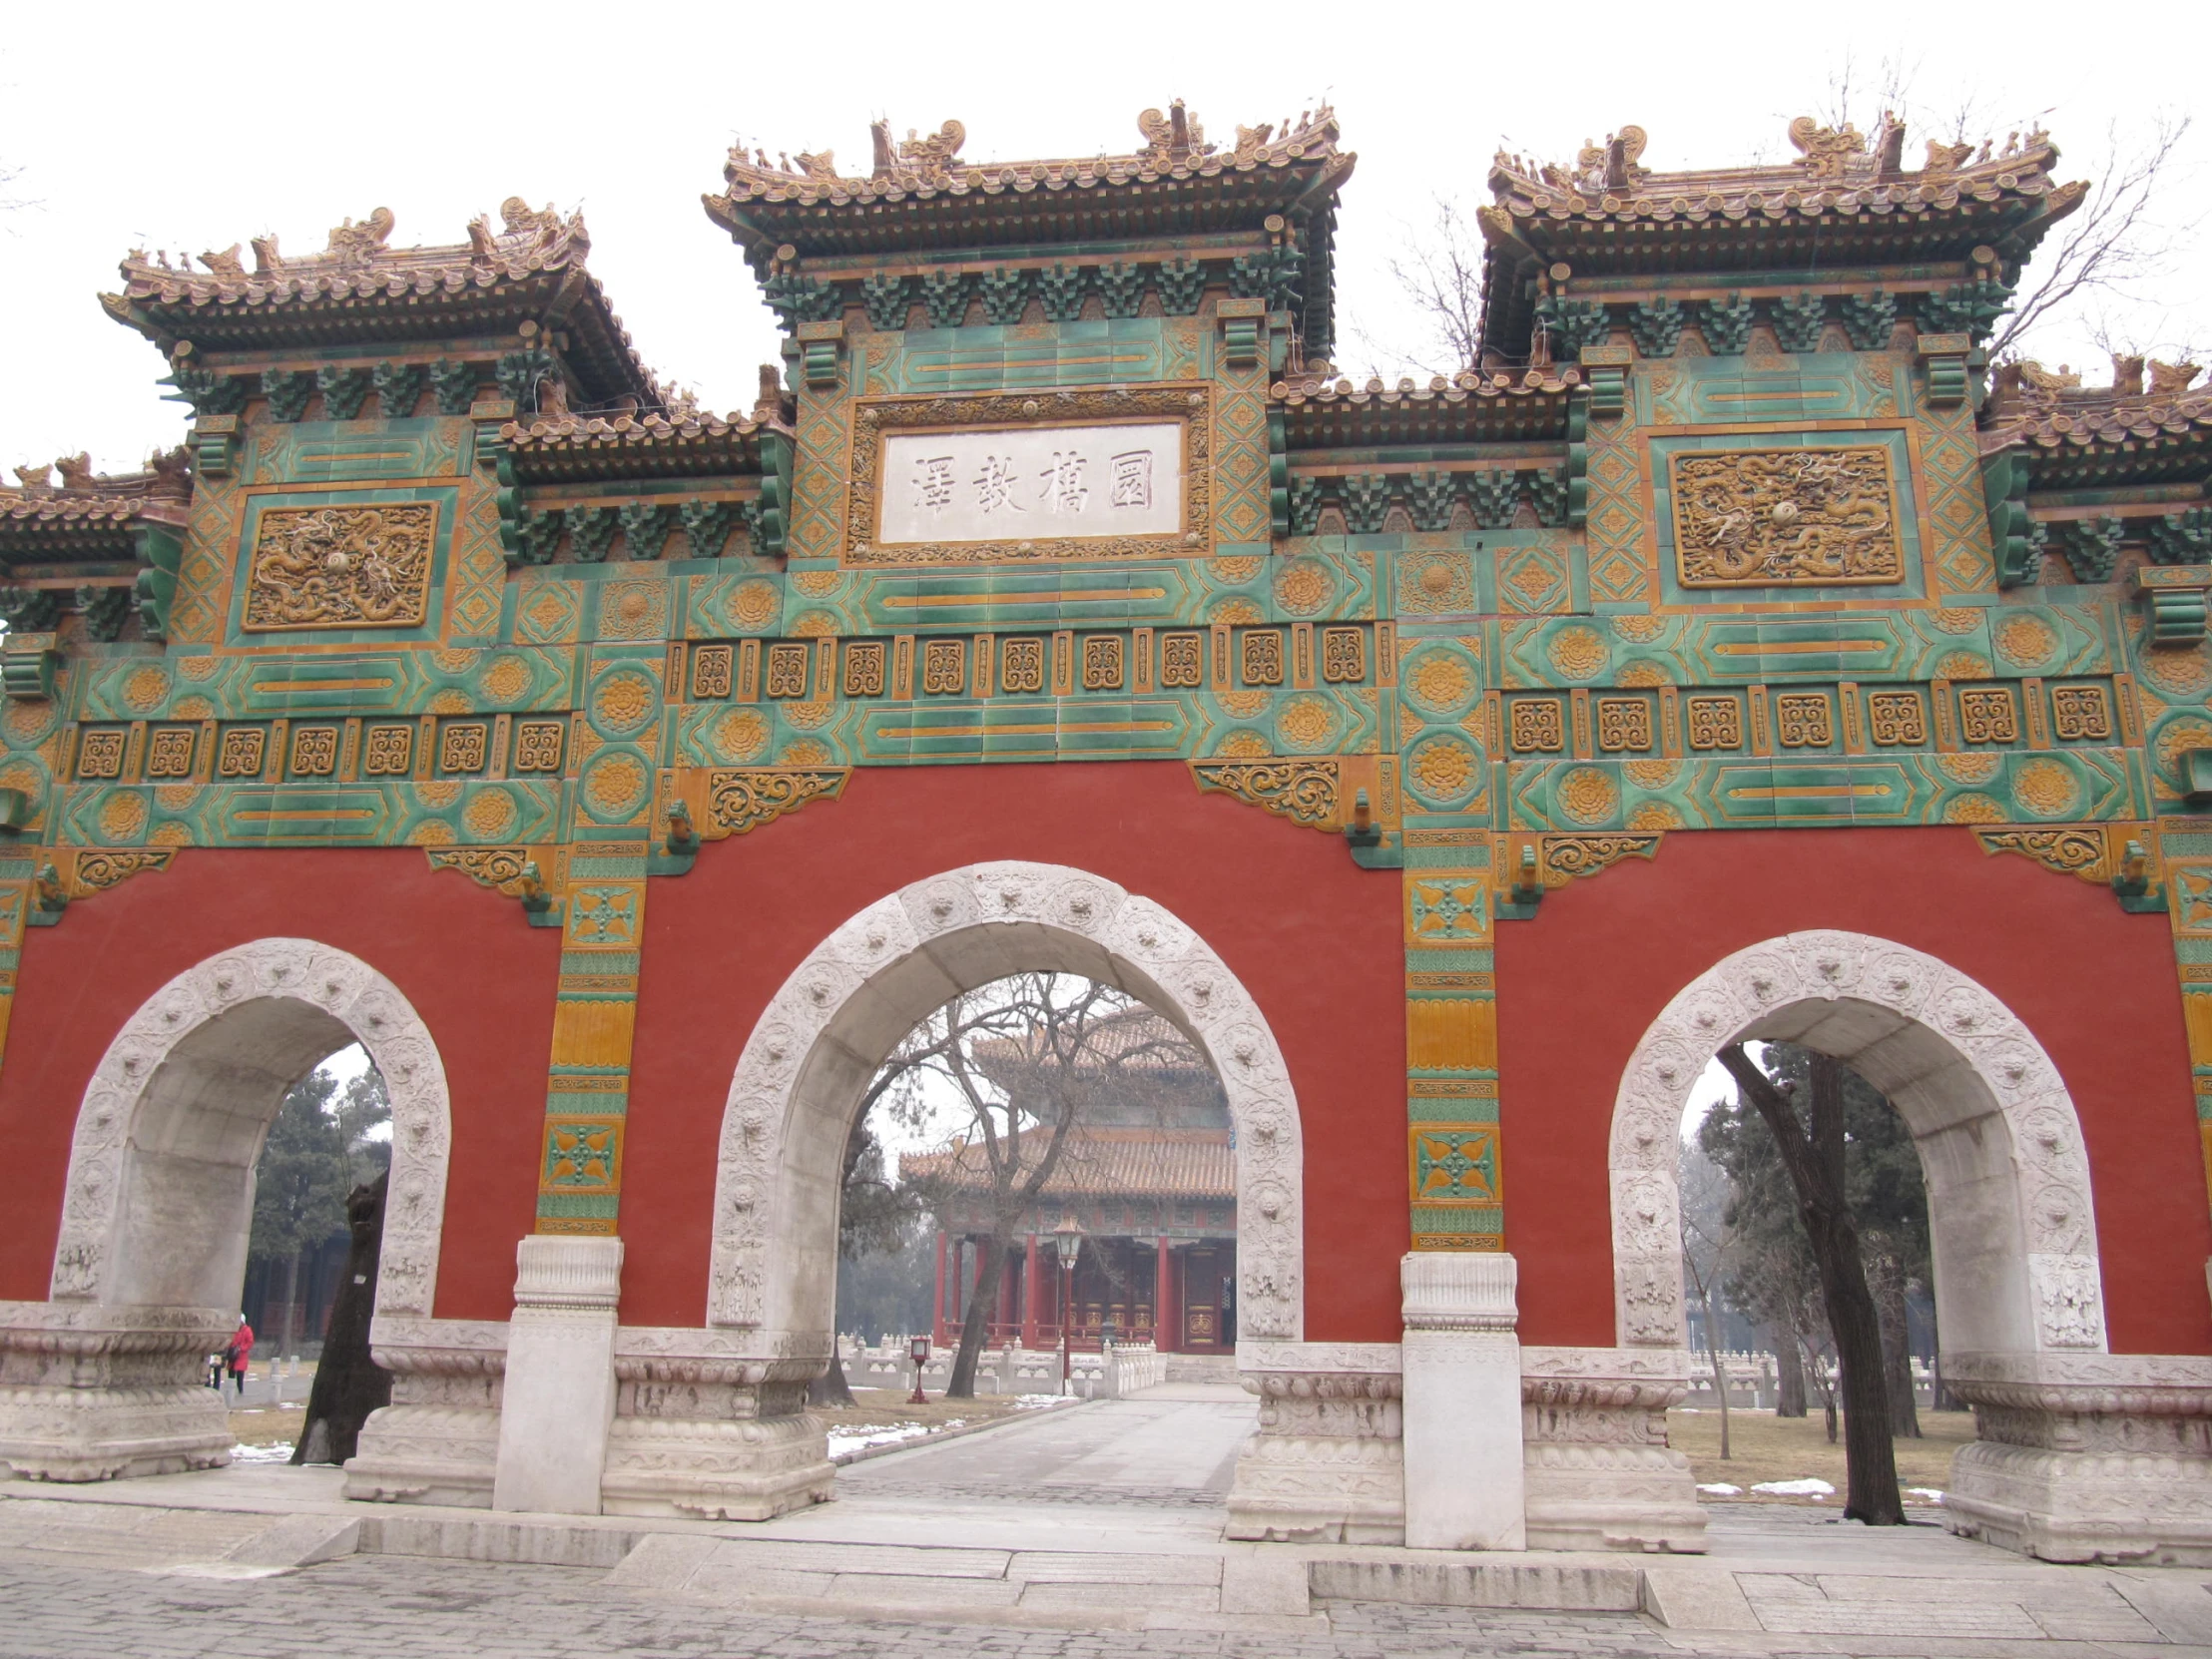 an ornate gate that has gold and green decorations on top